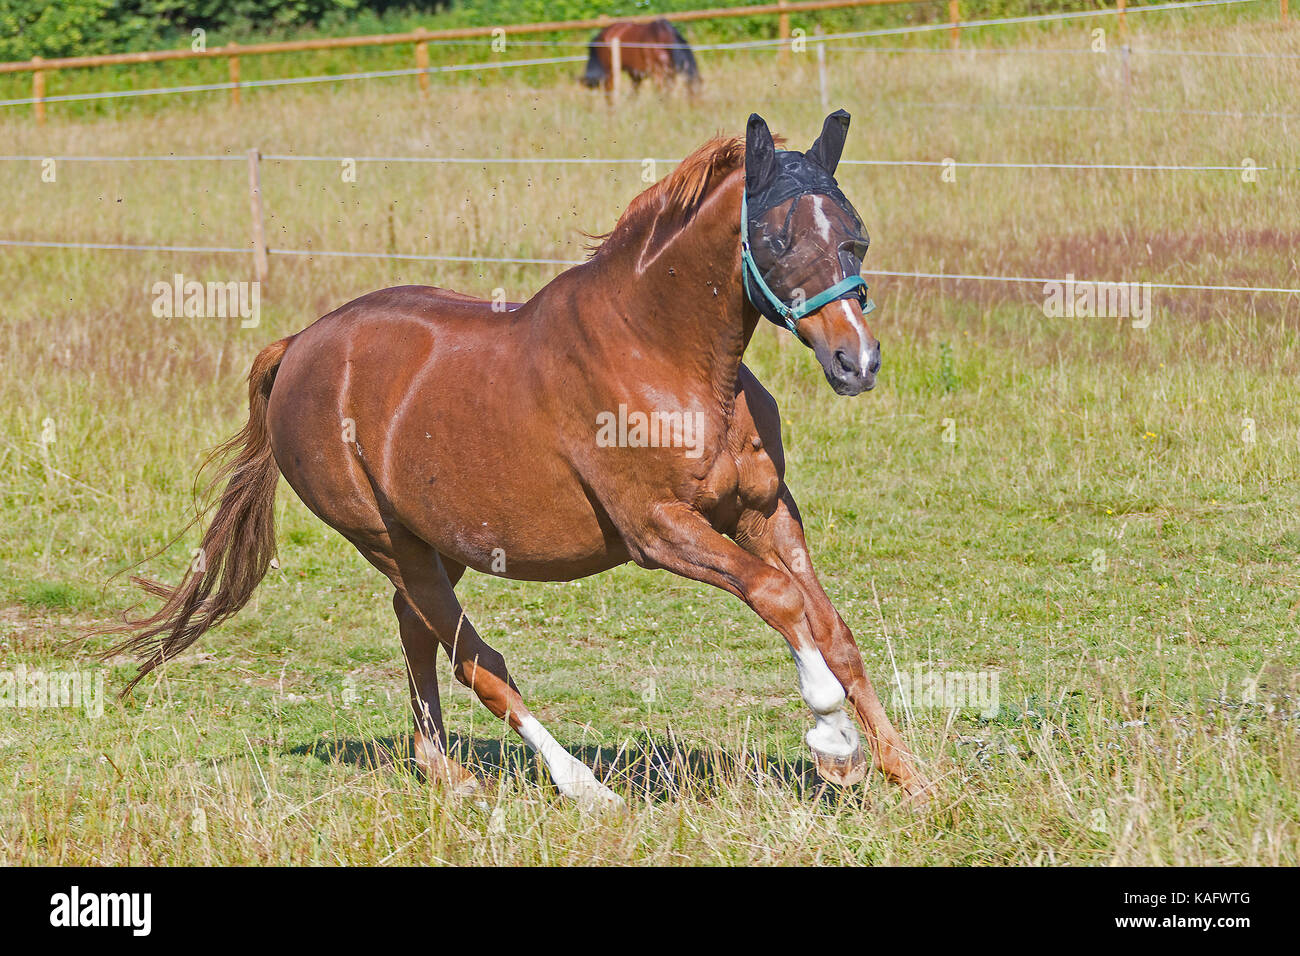 Danish Warmblood. Chestnut horse galloping on a meadow, wearing fly mask and fly cap. Germany Stock Photo